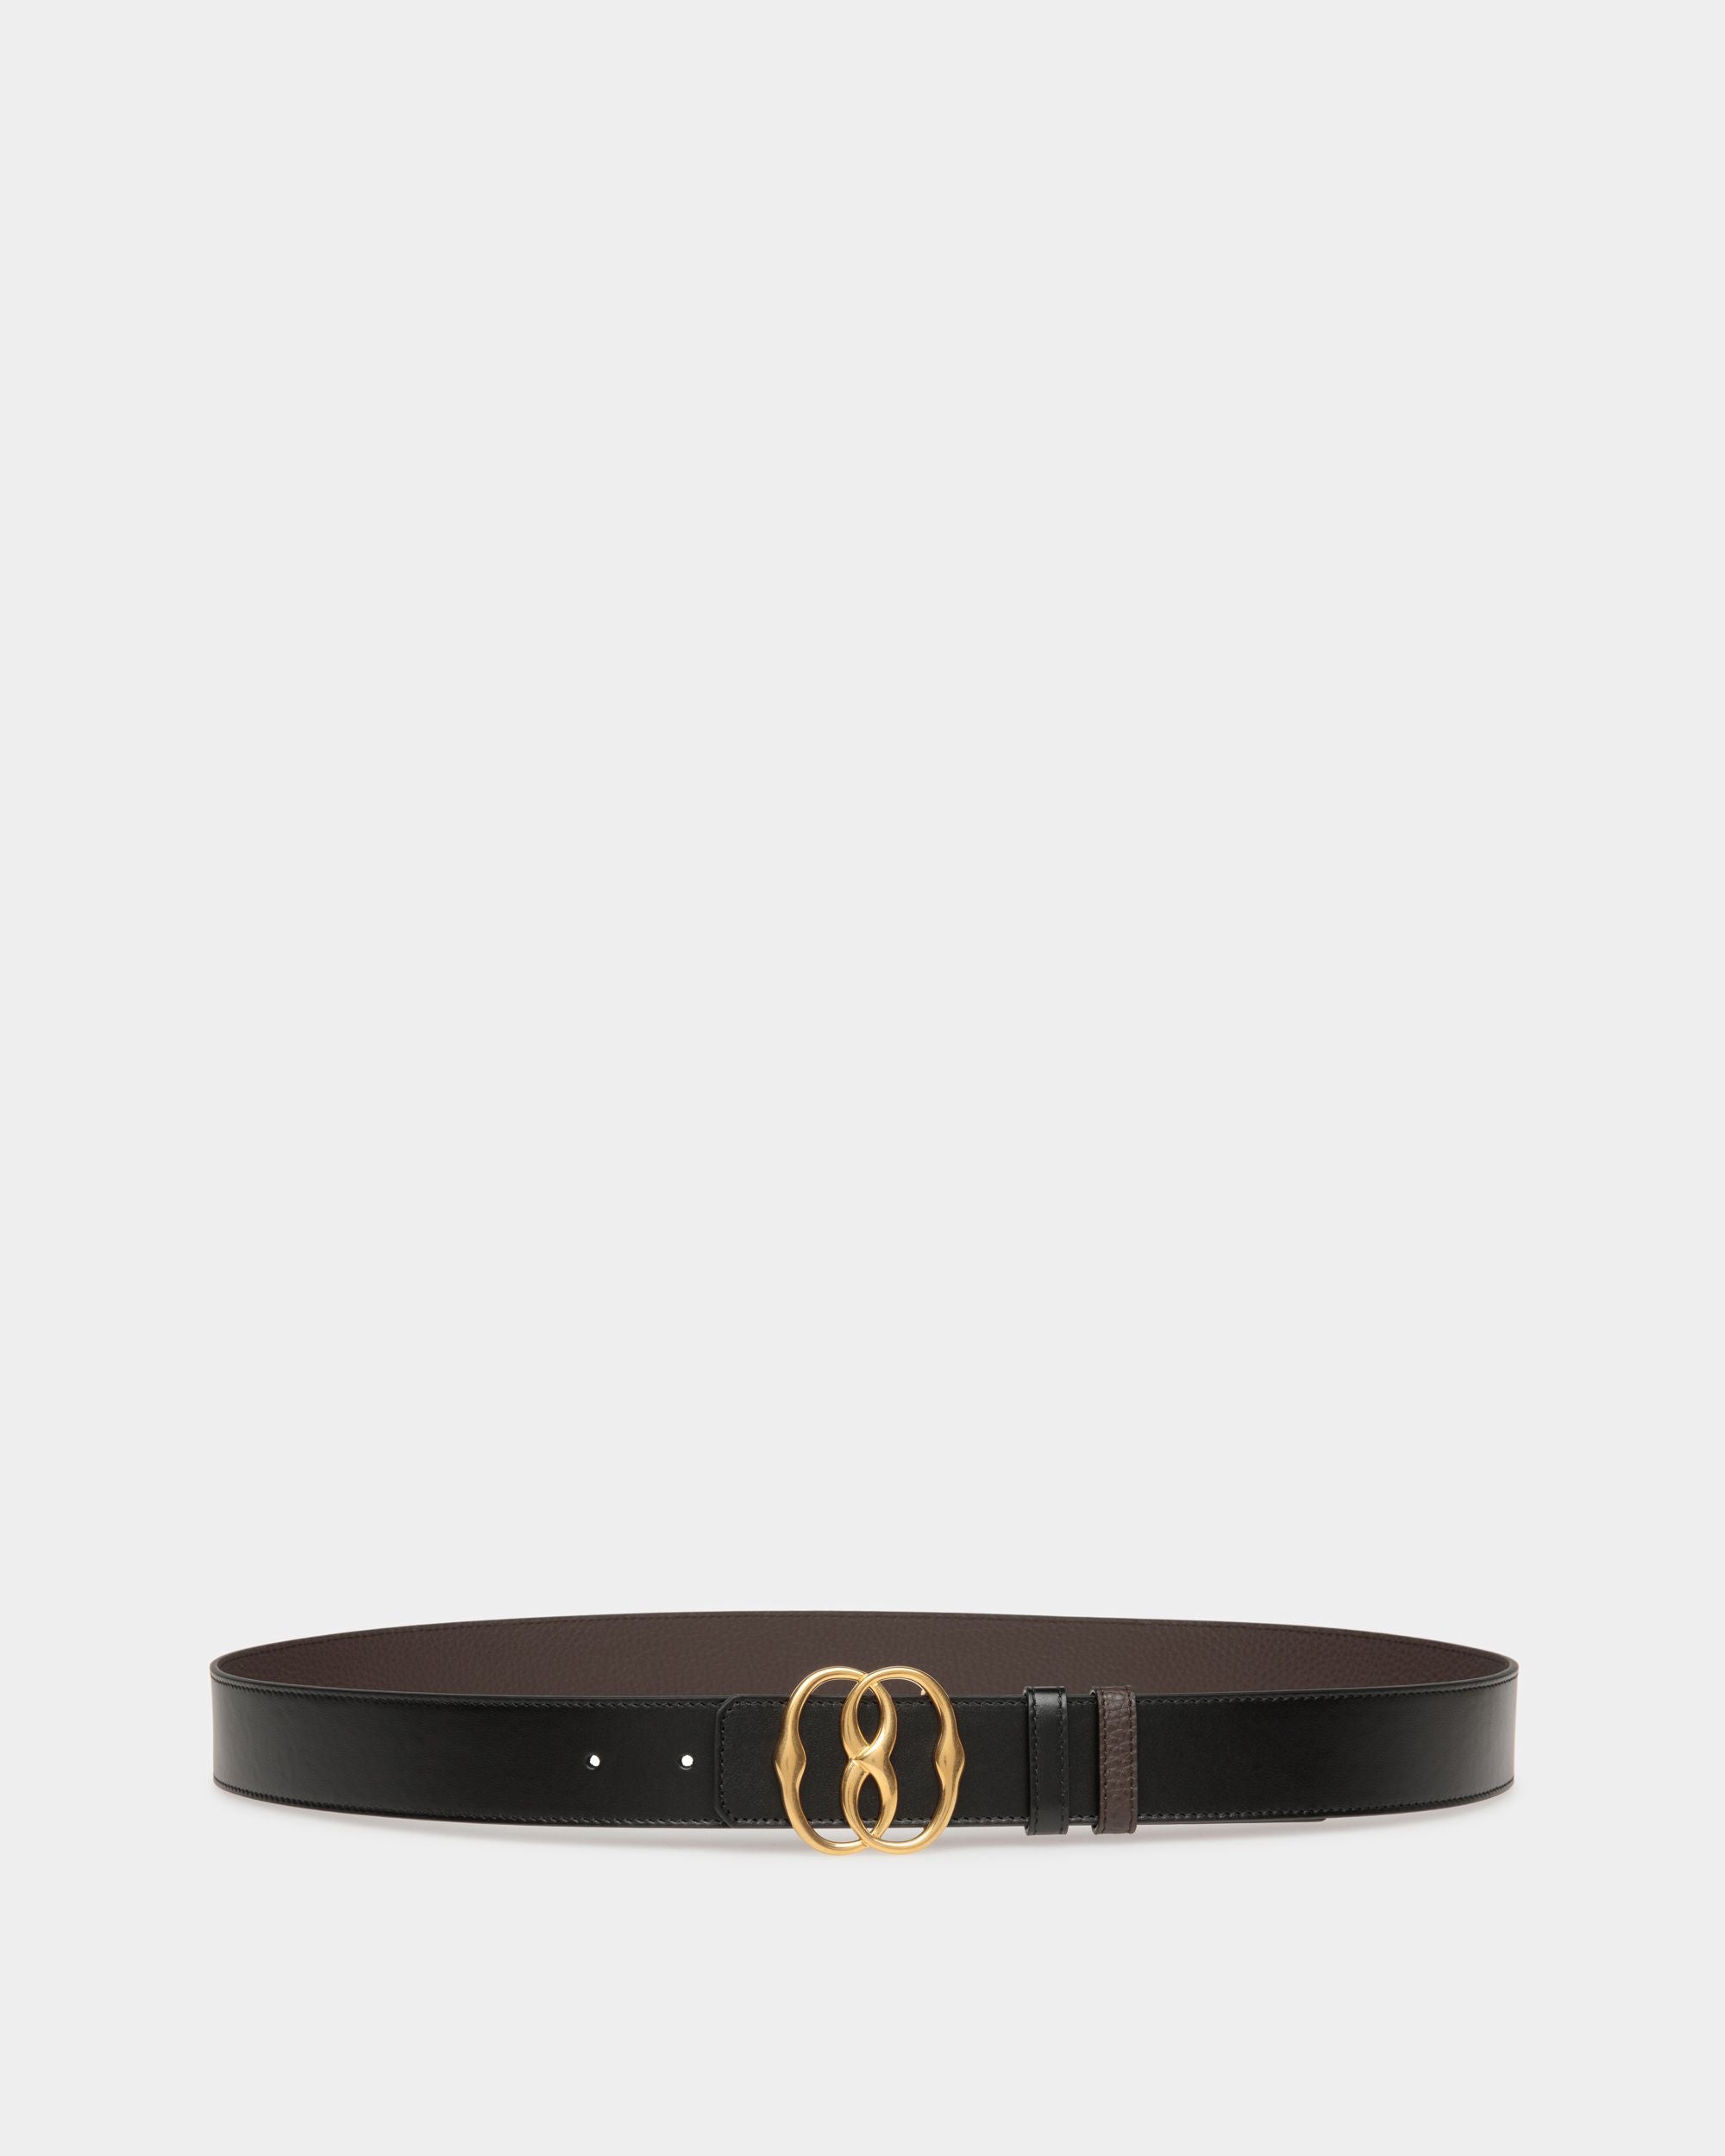 Bally Iconic | Men's Belt |Black And Brown Leather | Bally | Still Life Front